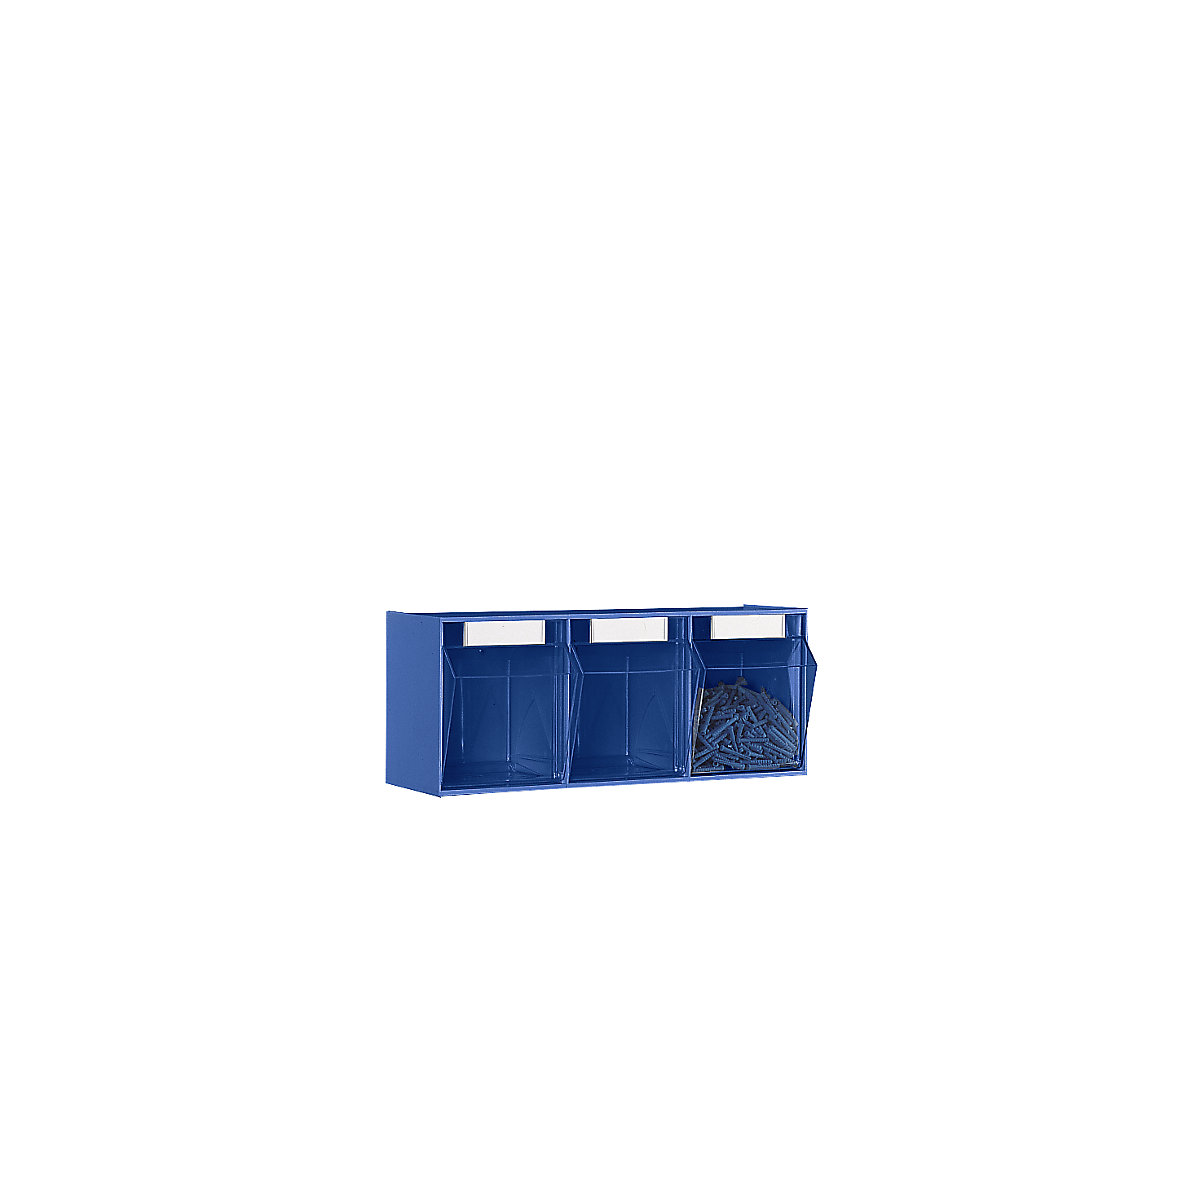 Visual storage container system, housing HxWxD 240 x 600 x 197 mm, 3 bins, blue-8